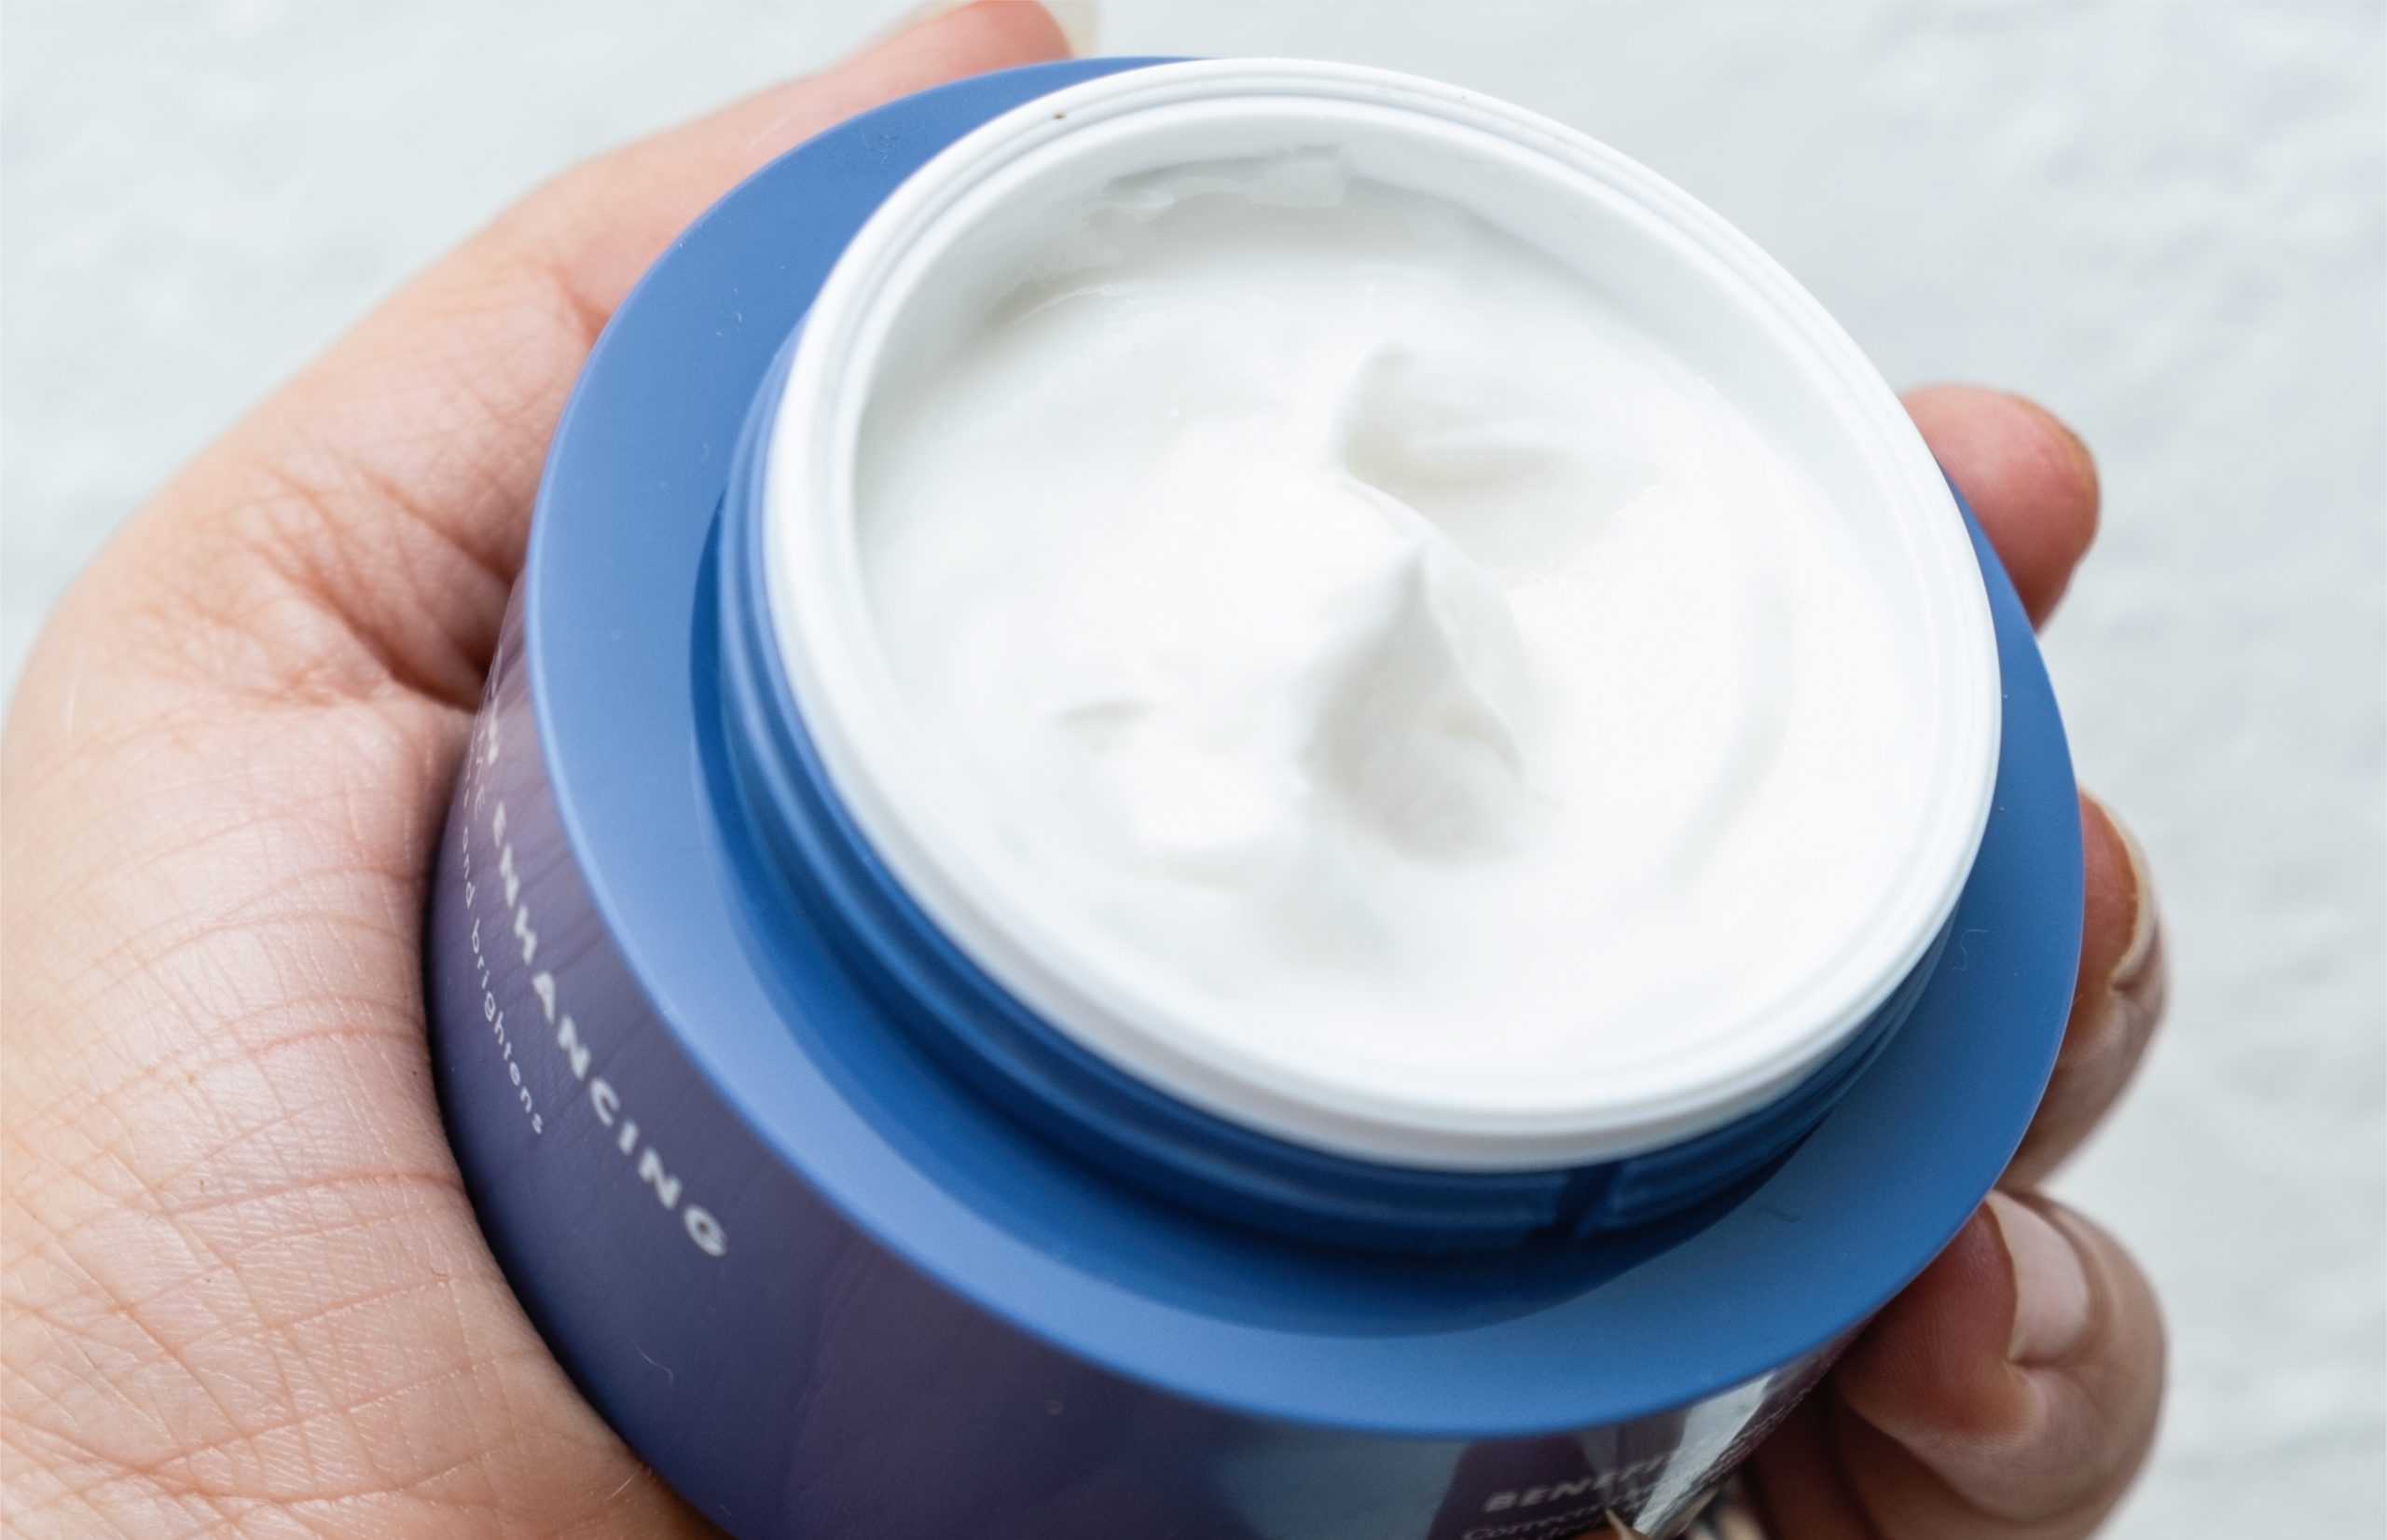 Should You Avoid Using Nighttime Moisturizer to Let Your Skin Breathe?